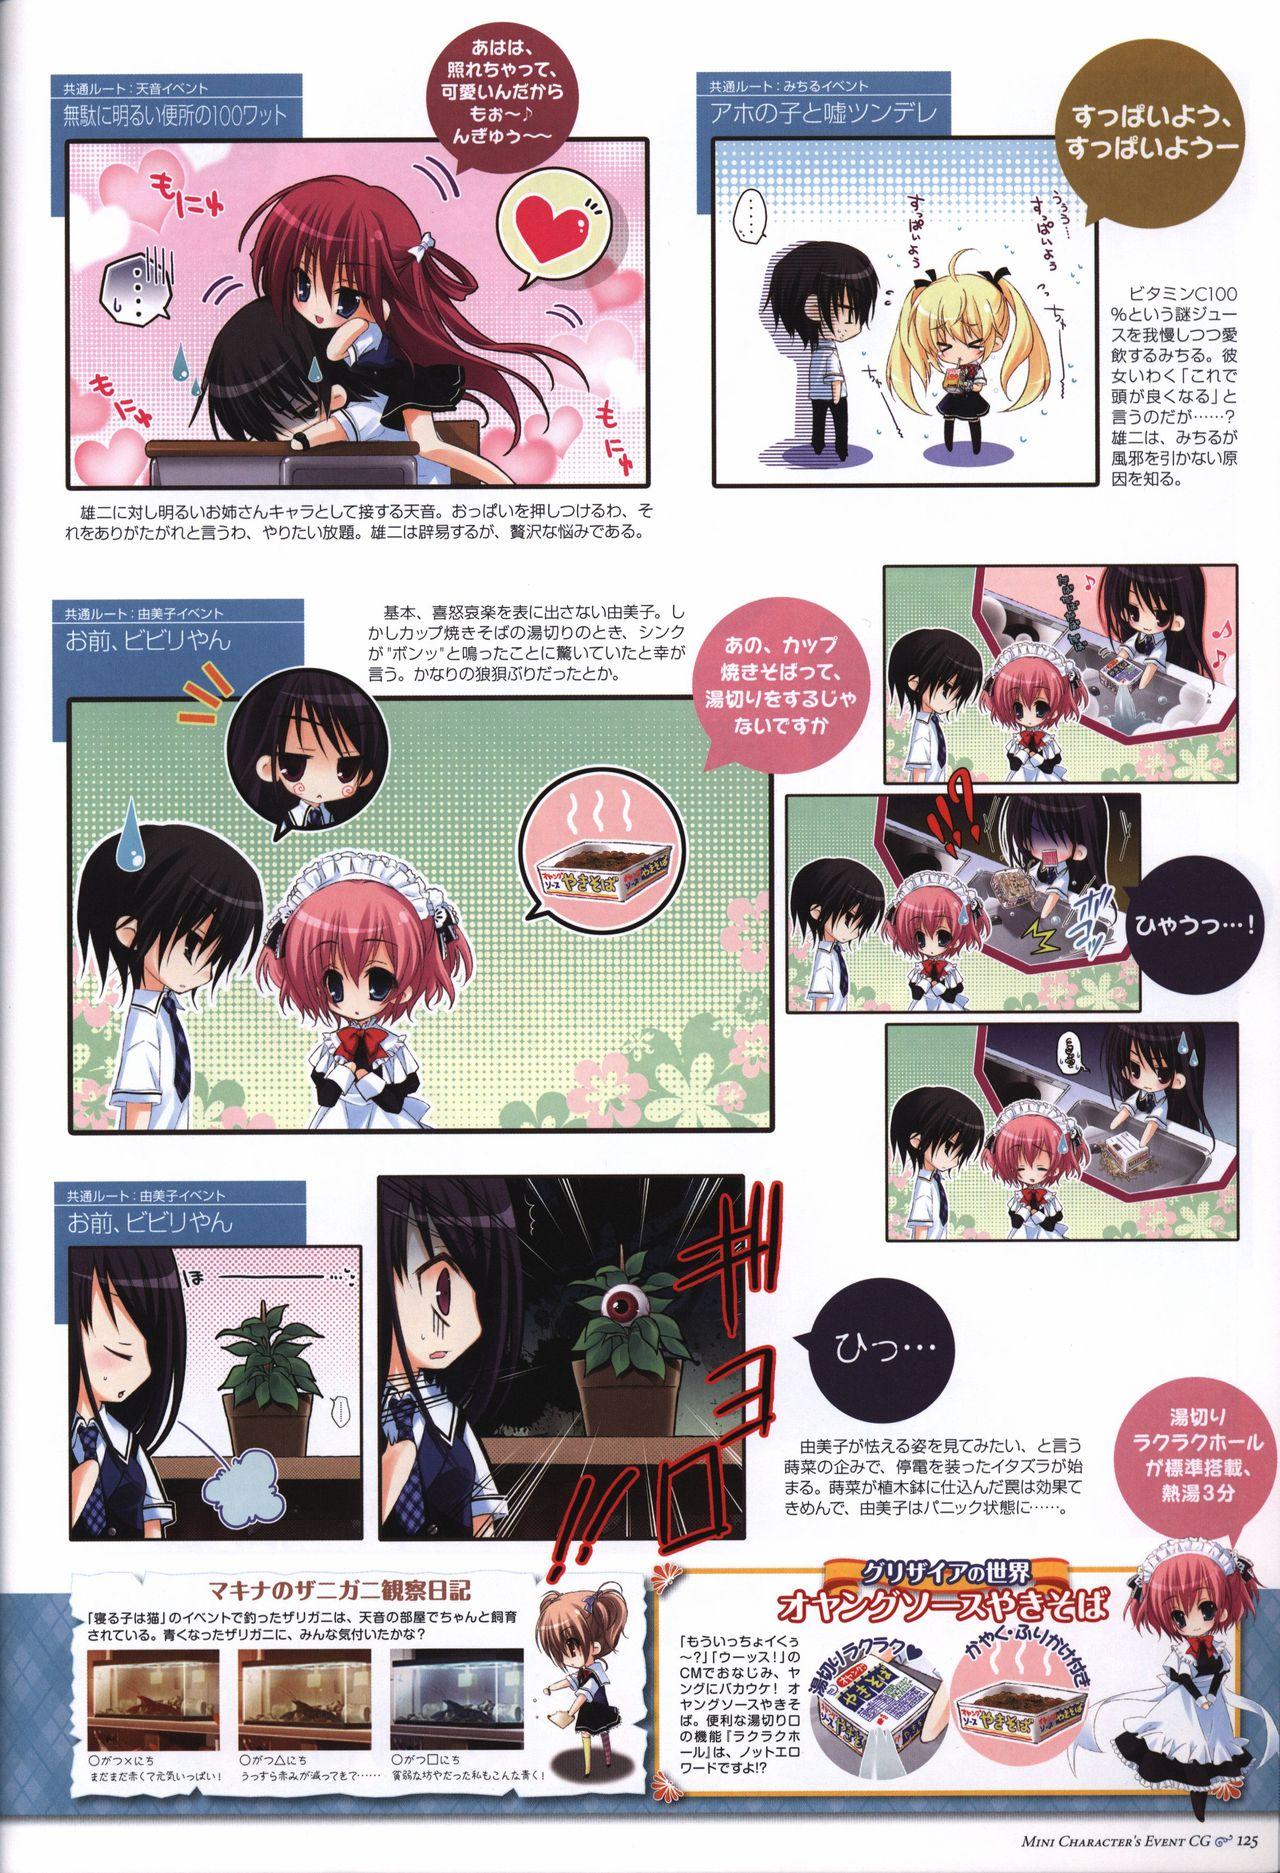 The Fruit of Grisaia Visual FanBook 125